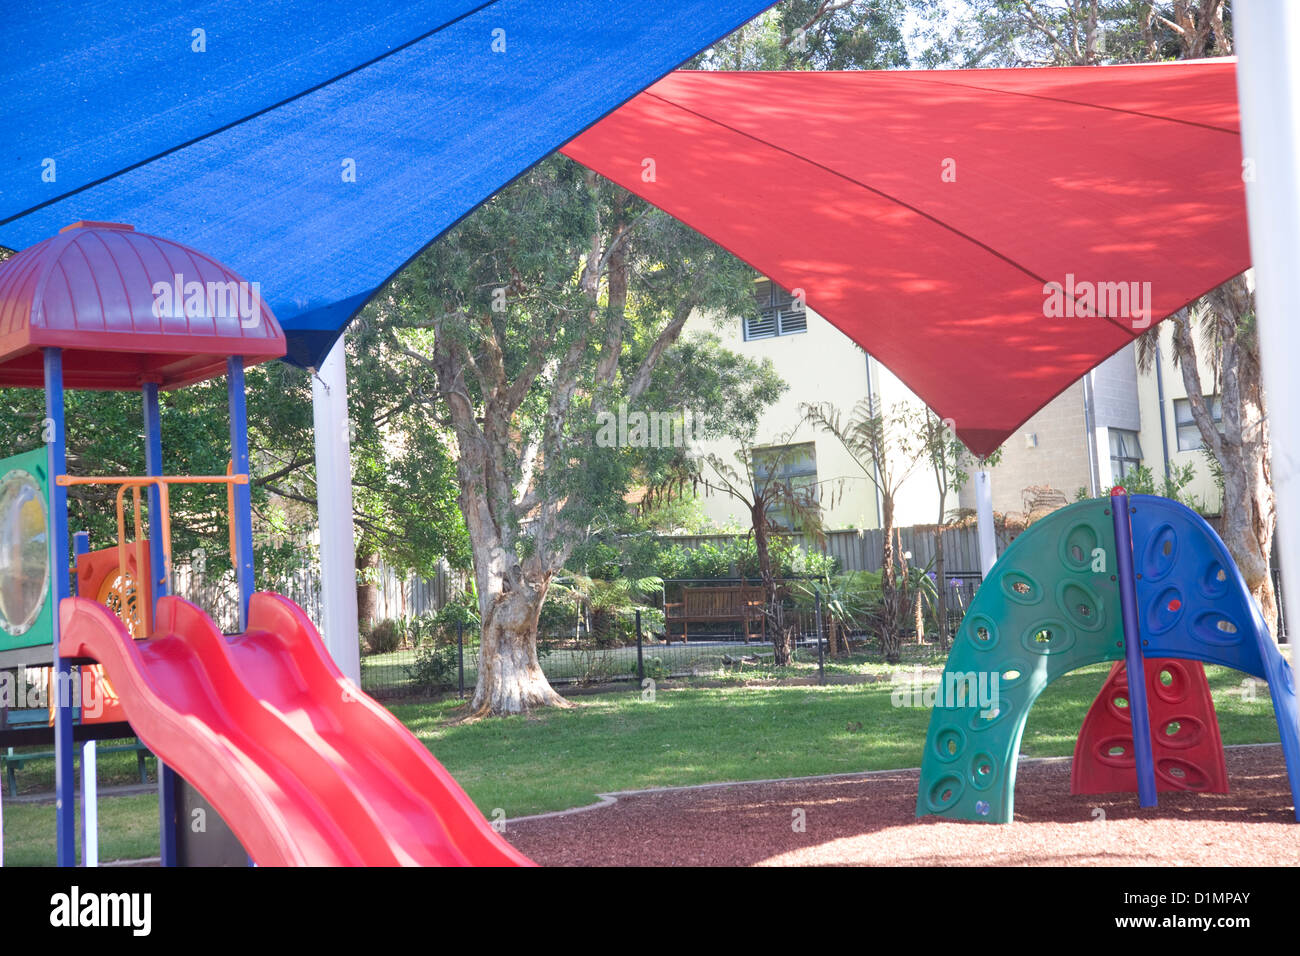 Sun Security Safety Awnings Over An Australian Playground Prevent